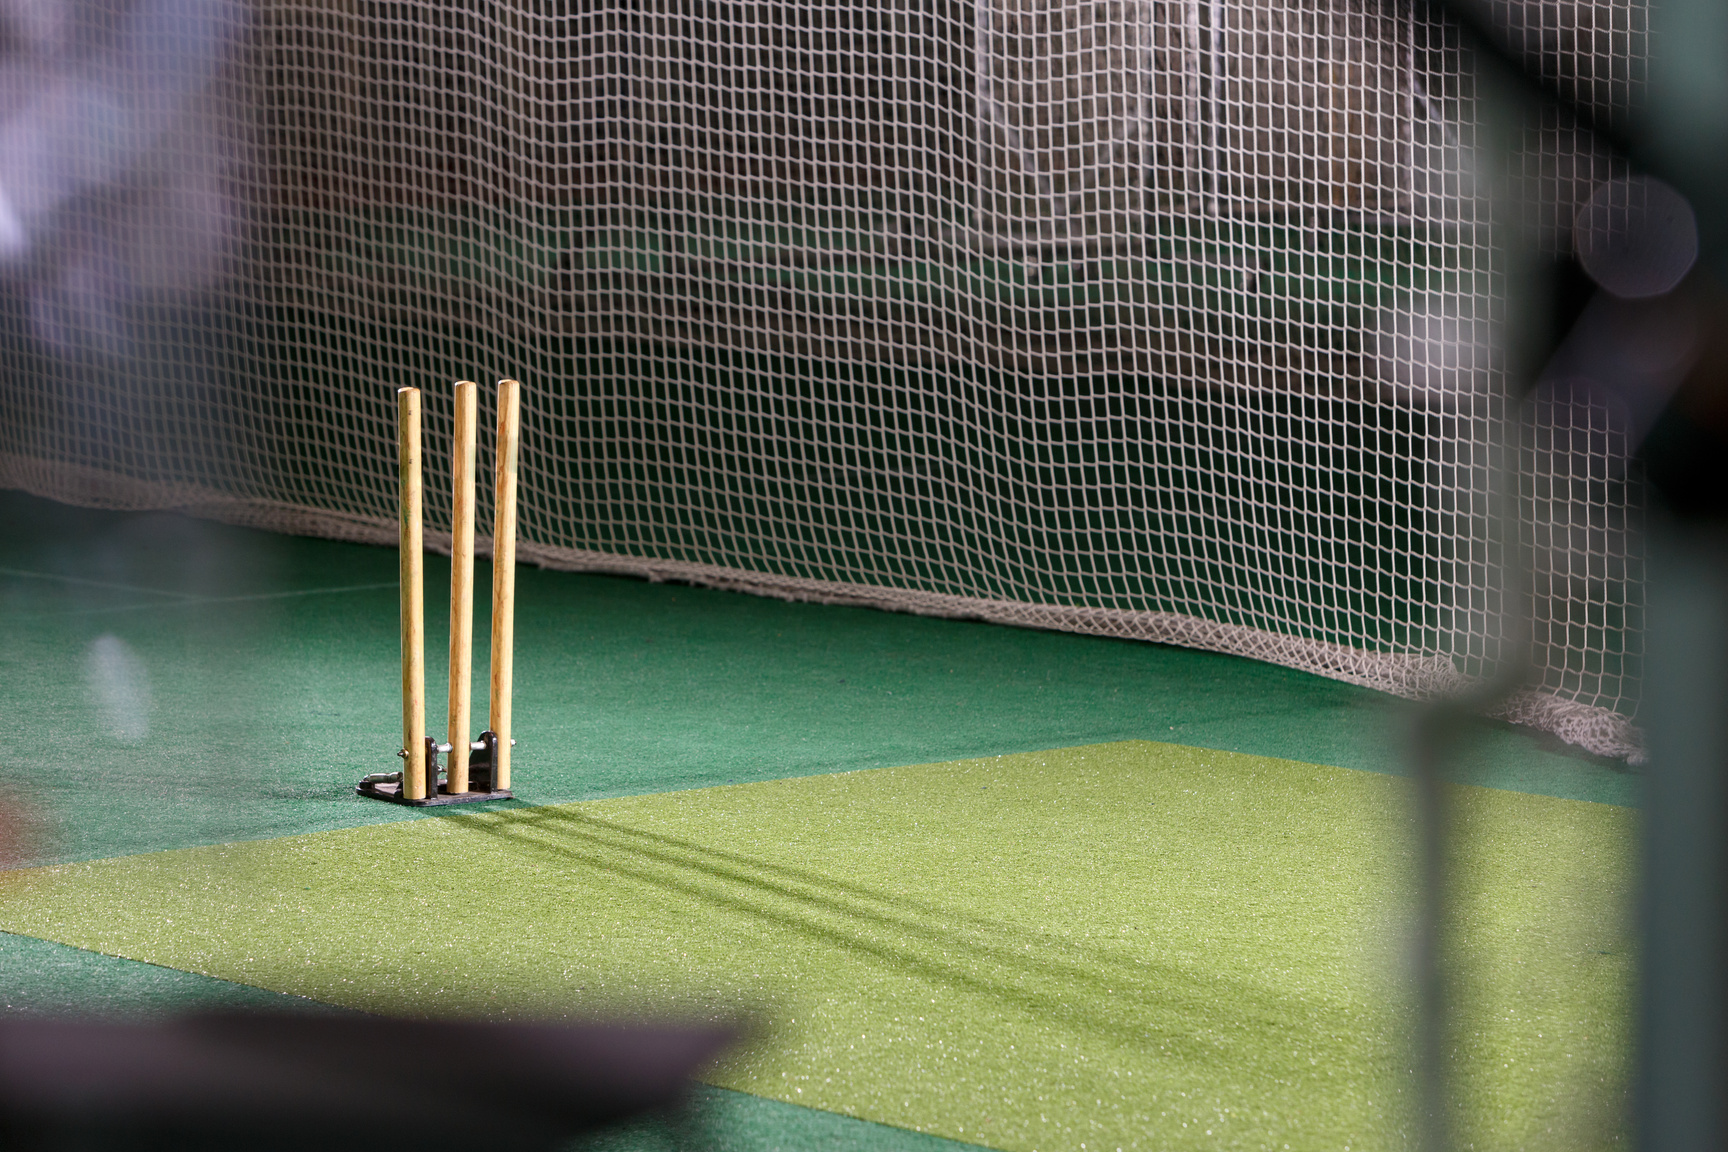 Cricket Practice Nets and Stumps